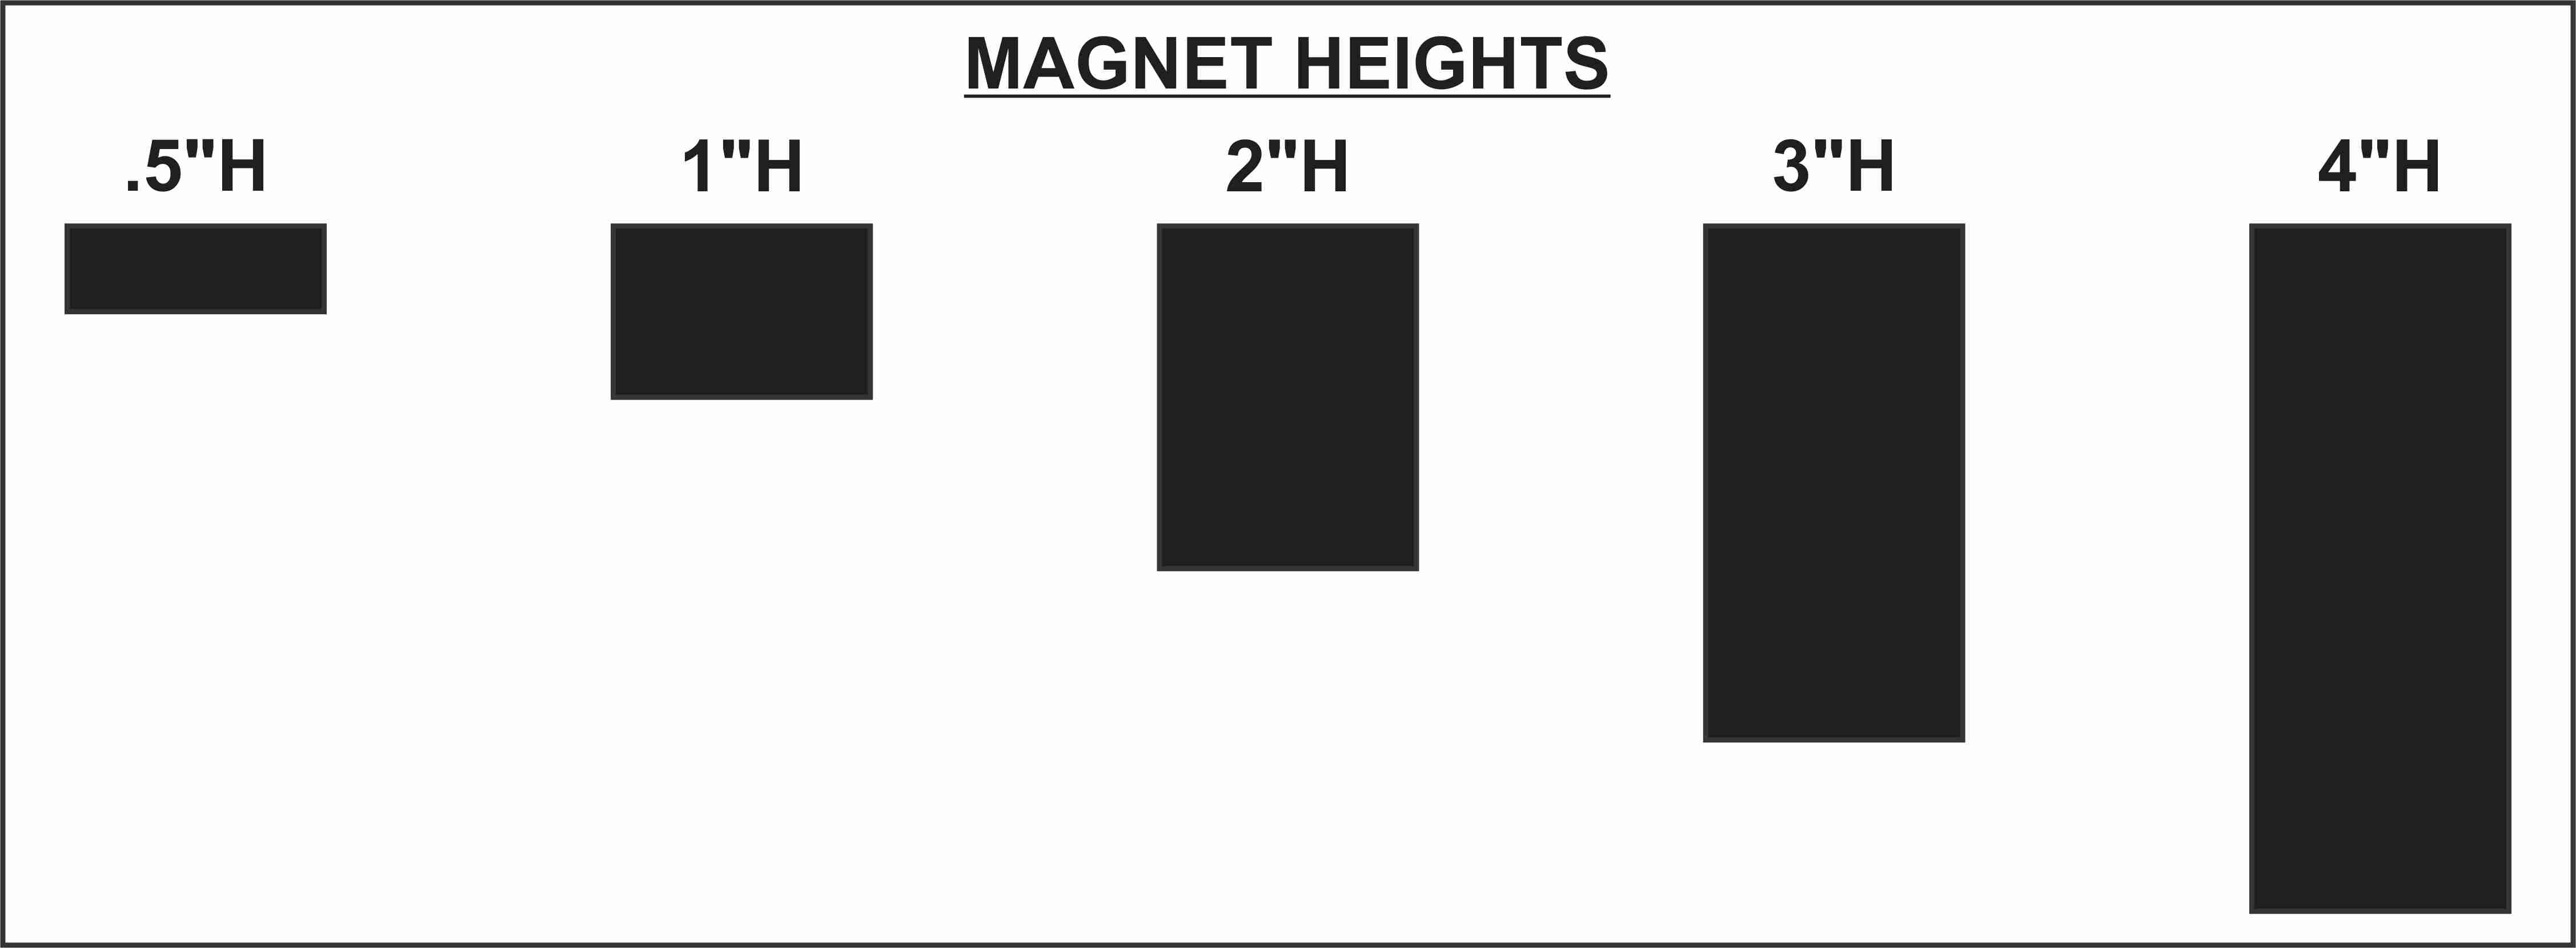 double sided magnets dormant